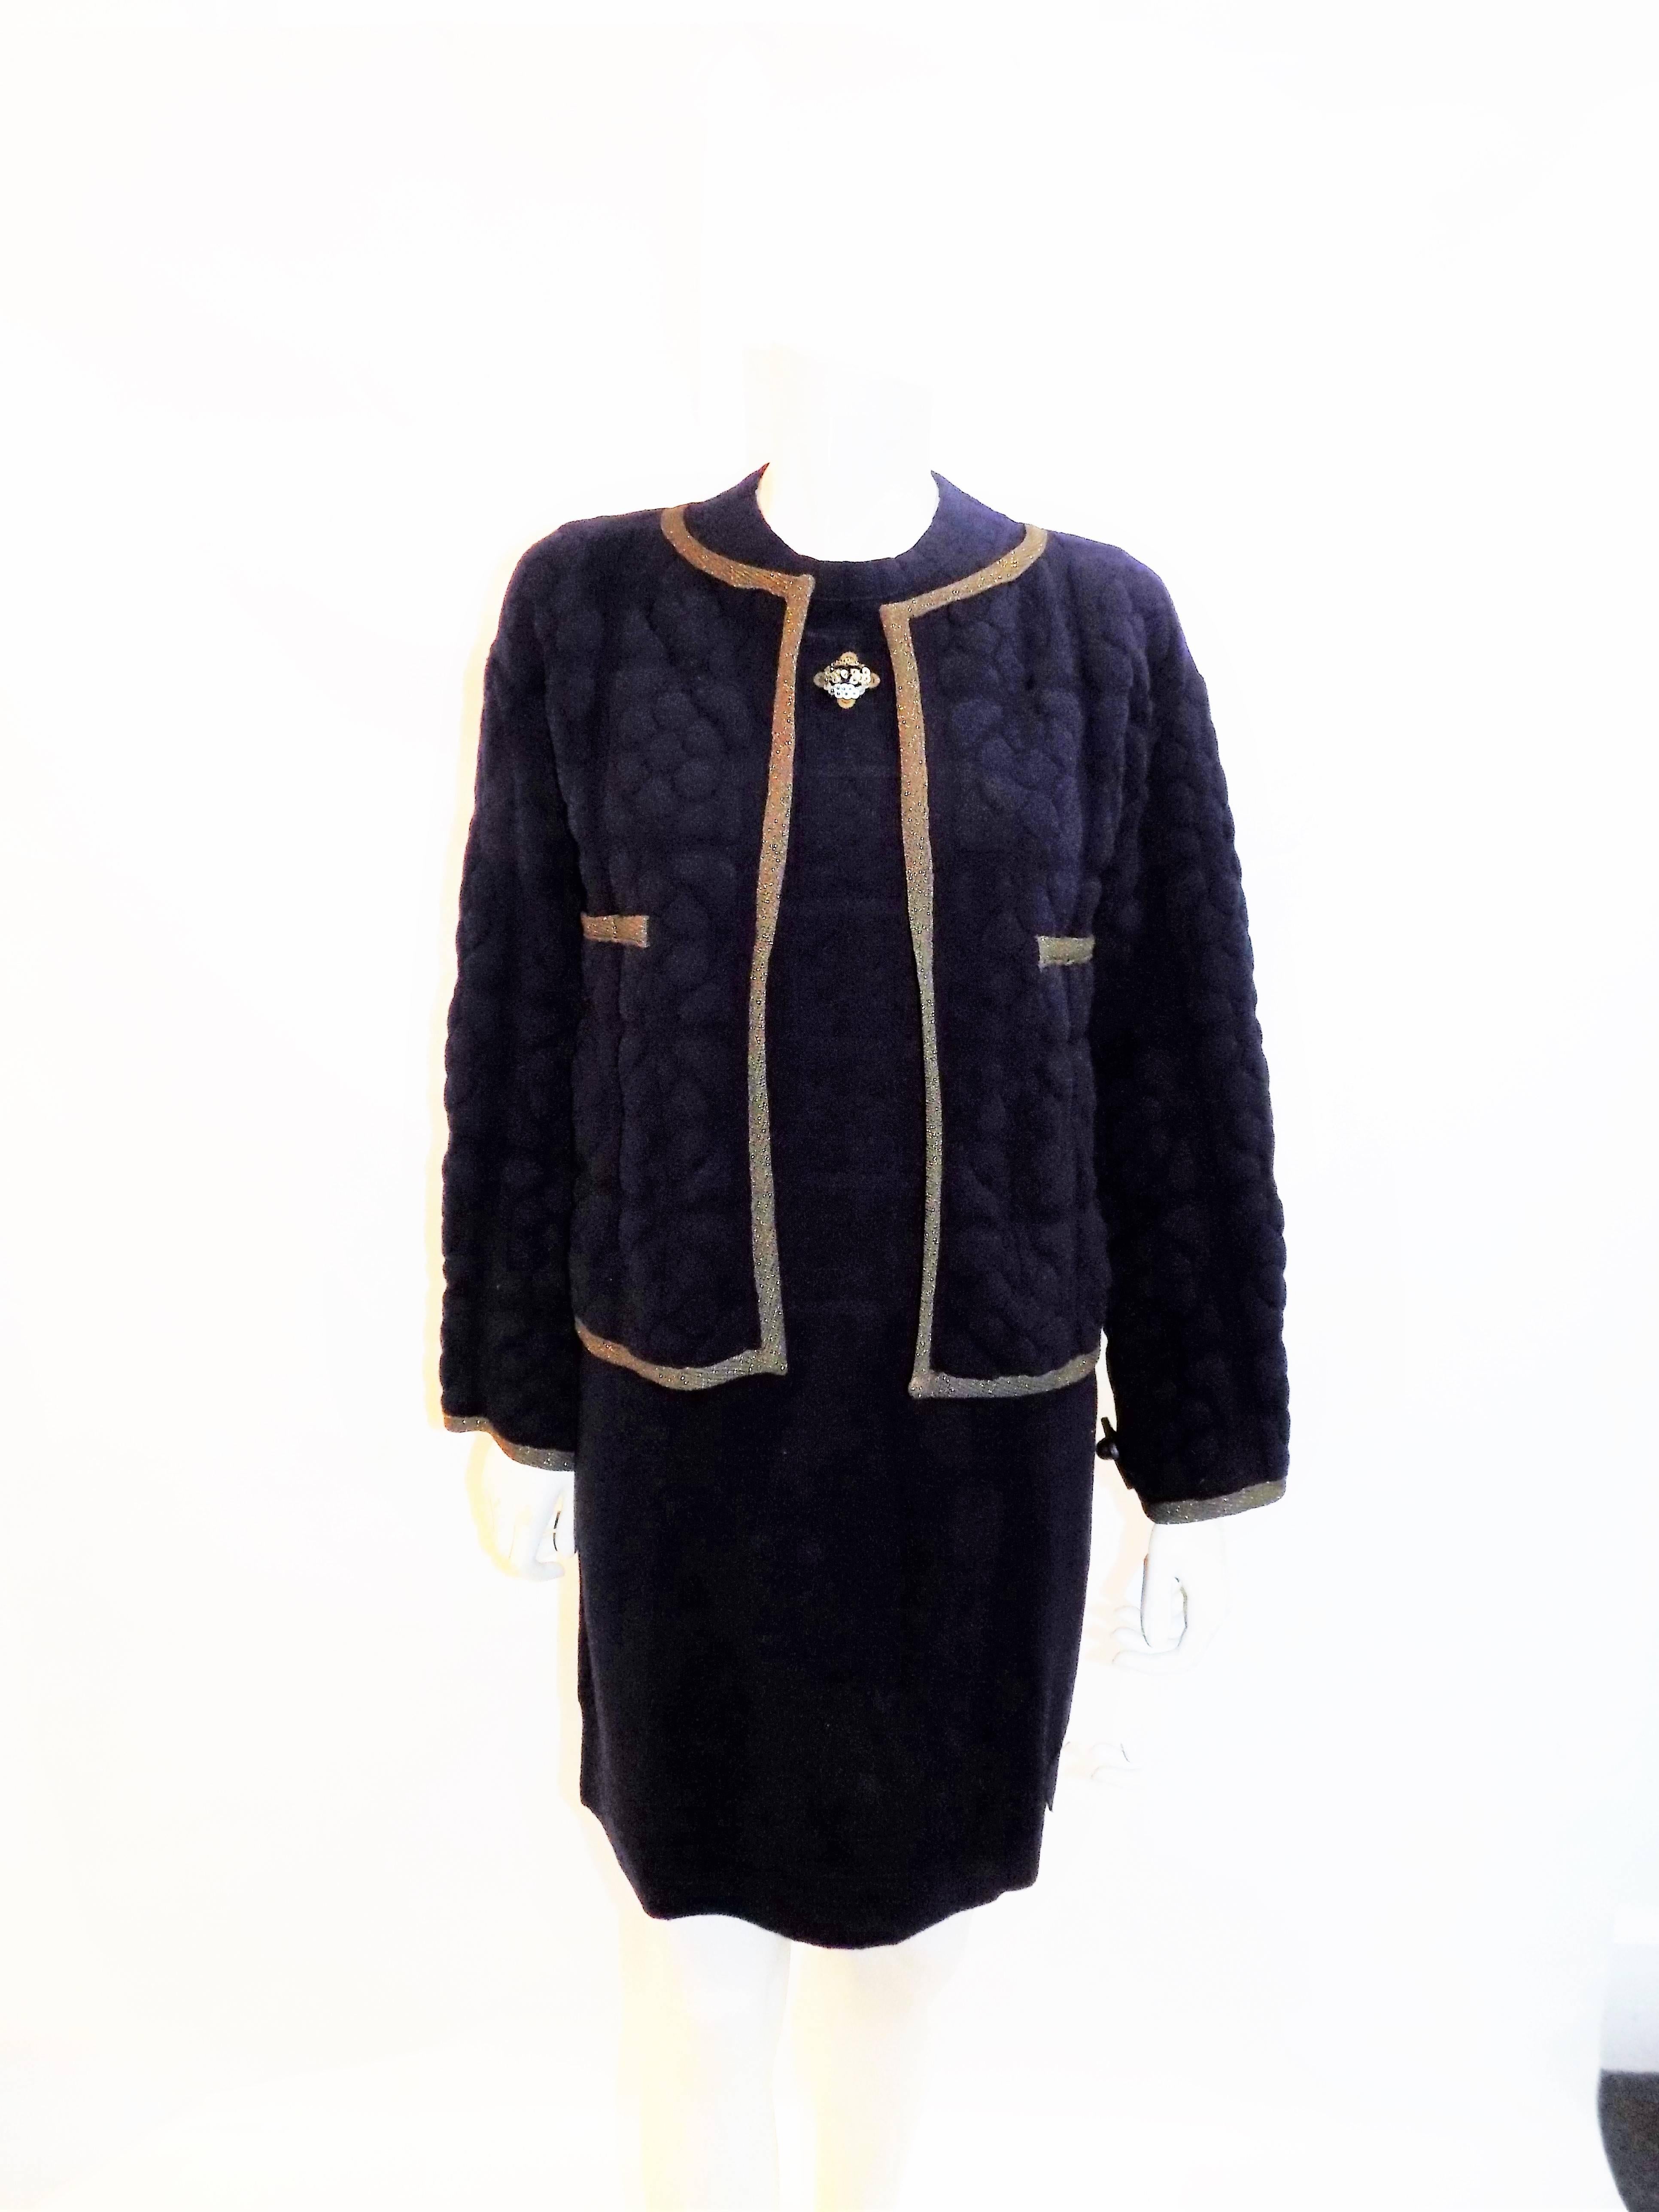 Women's Chanel raise/ quilted knit navy dress and jacket with Lesage patch